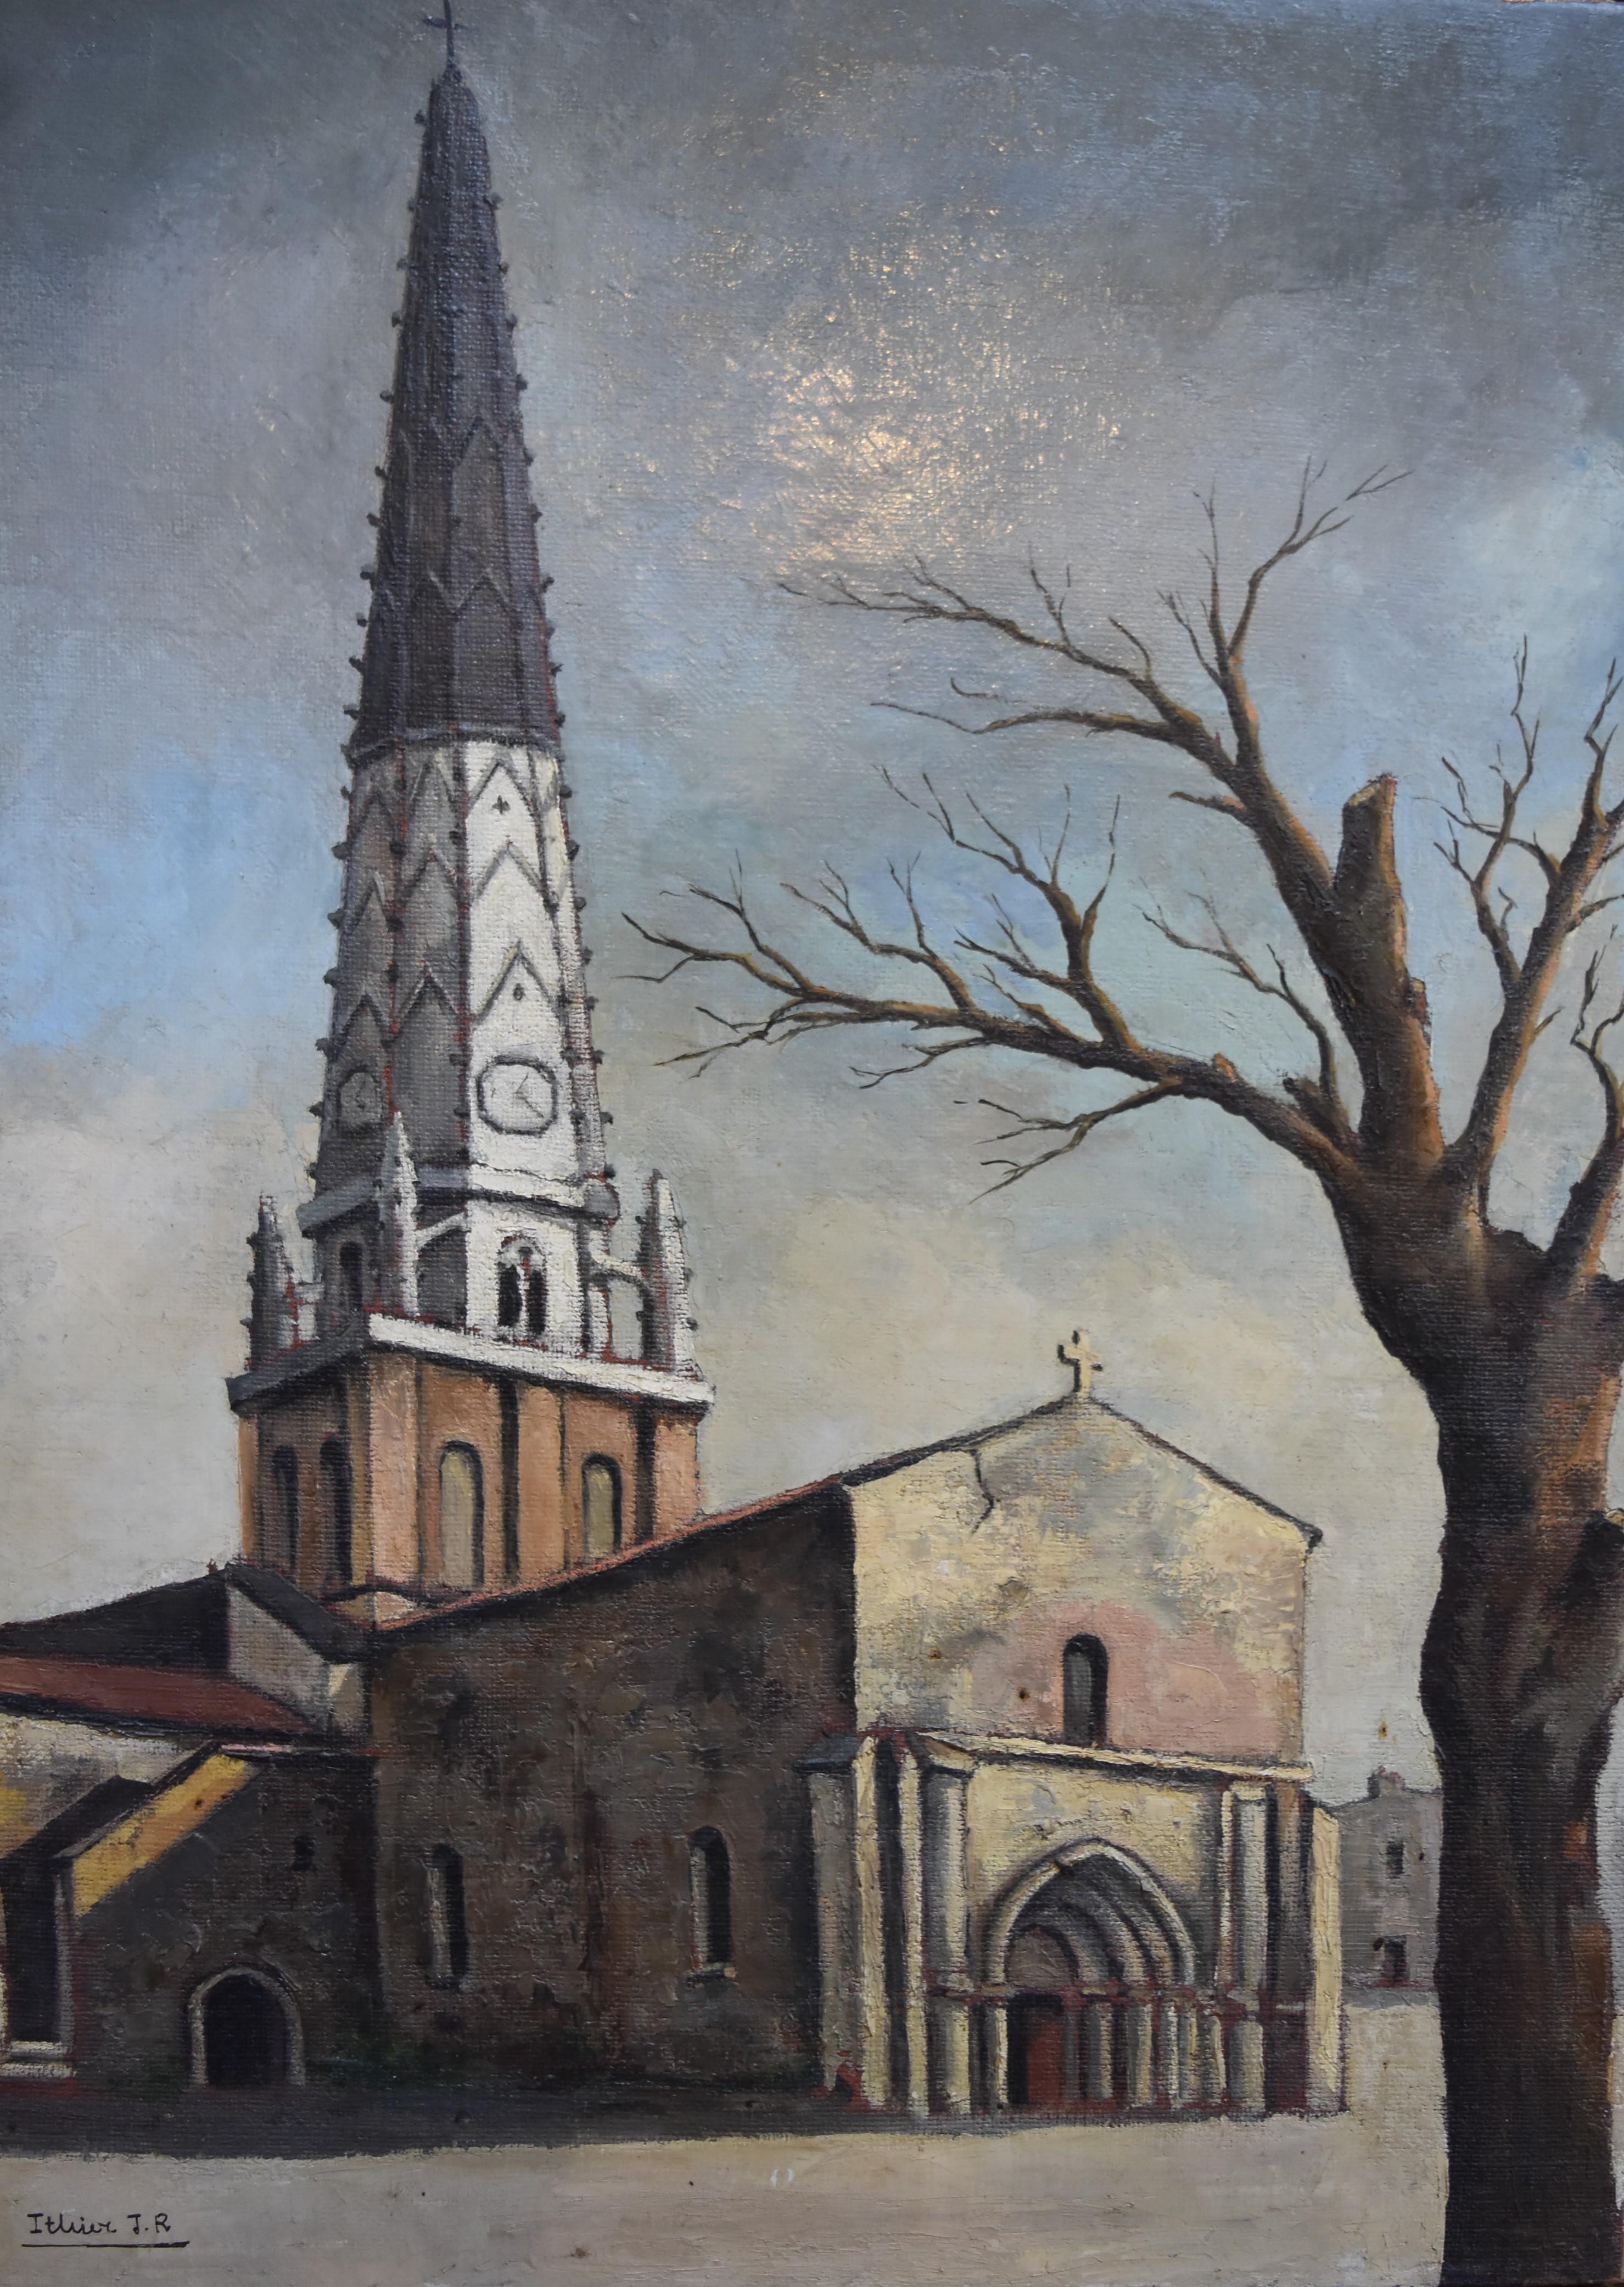 Jean Robert Ithier (1904-1977) Ars en Ré, view of the church, oil on canvas - Gray Figurative Painting by JEAN ROBERT ITHIER 